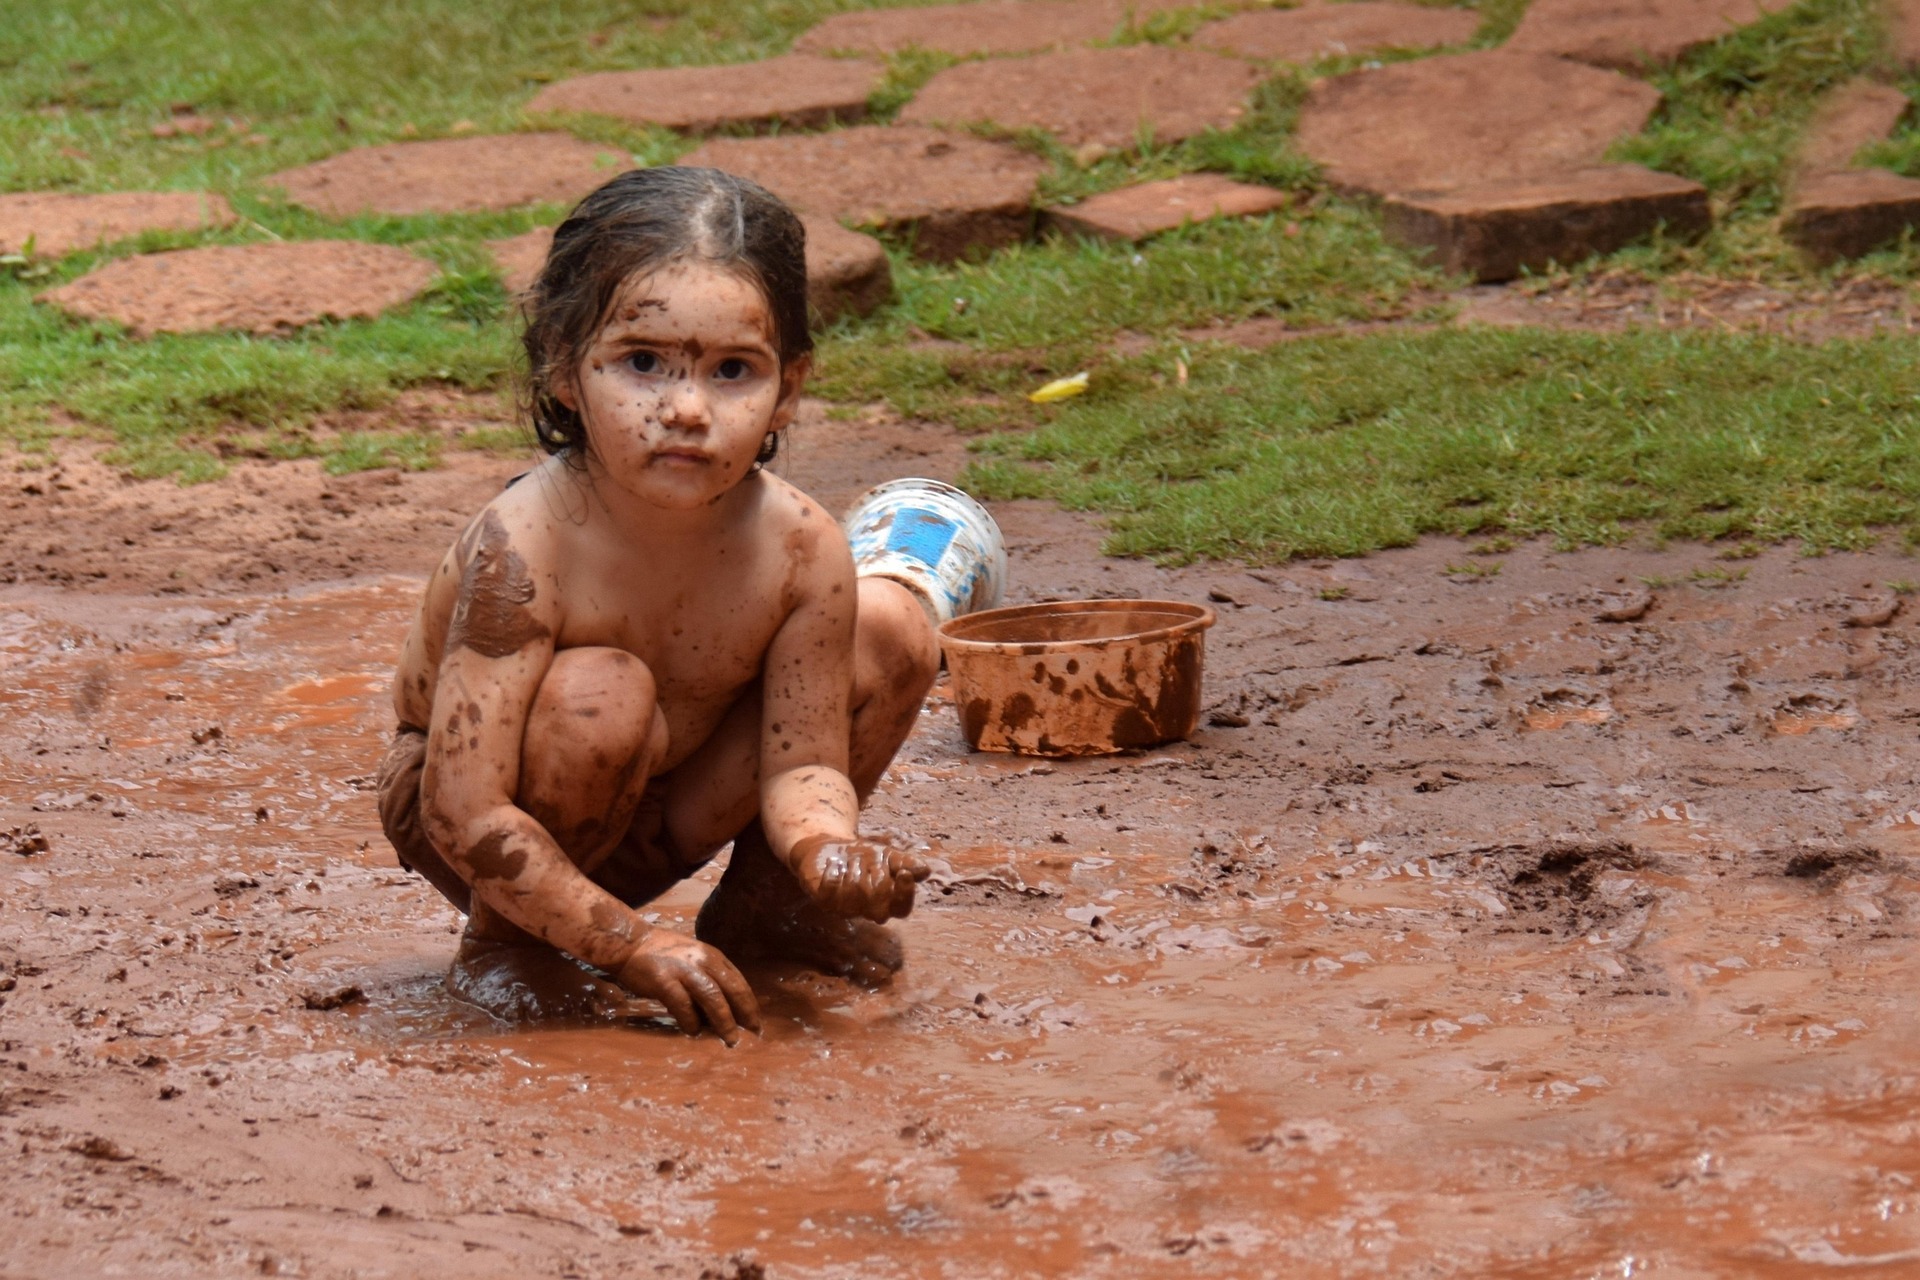 It is a sunny day. A young dark-haired and dark-skinned girl is crouched down in a huge mud puddle. She plays with the mud. Nearby are her containers for play. Behind her is grass and a path.